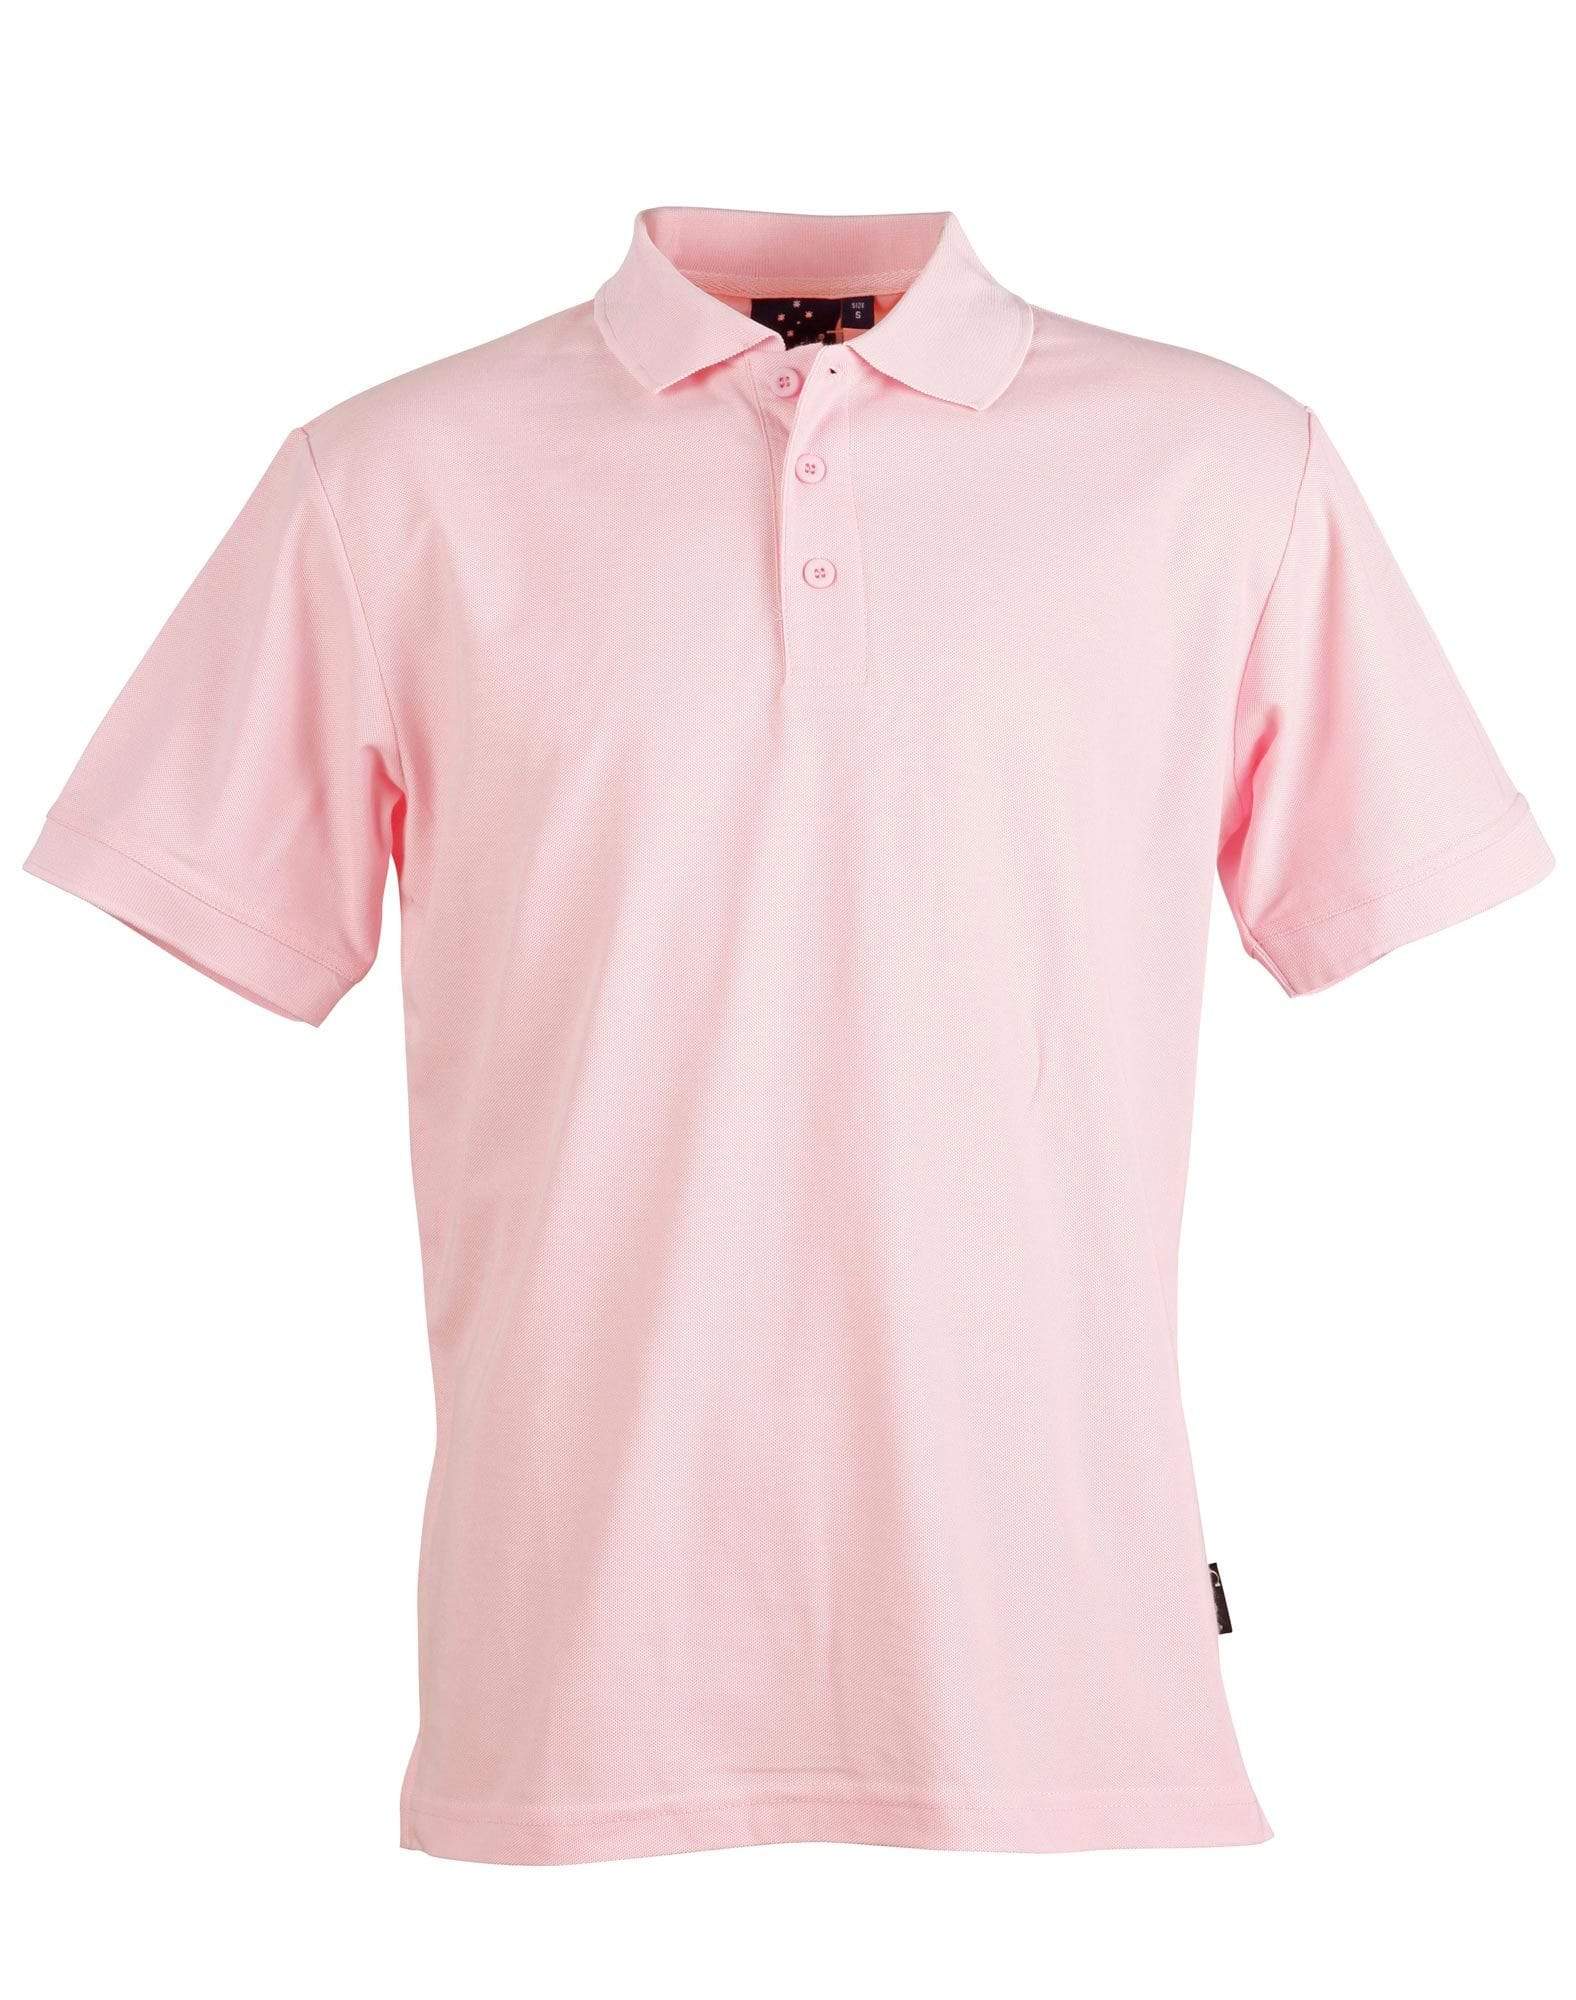 Connection Polo Men's Ps63 Casual Wear Winning Spirit Light Pink S 